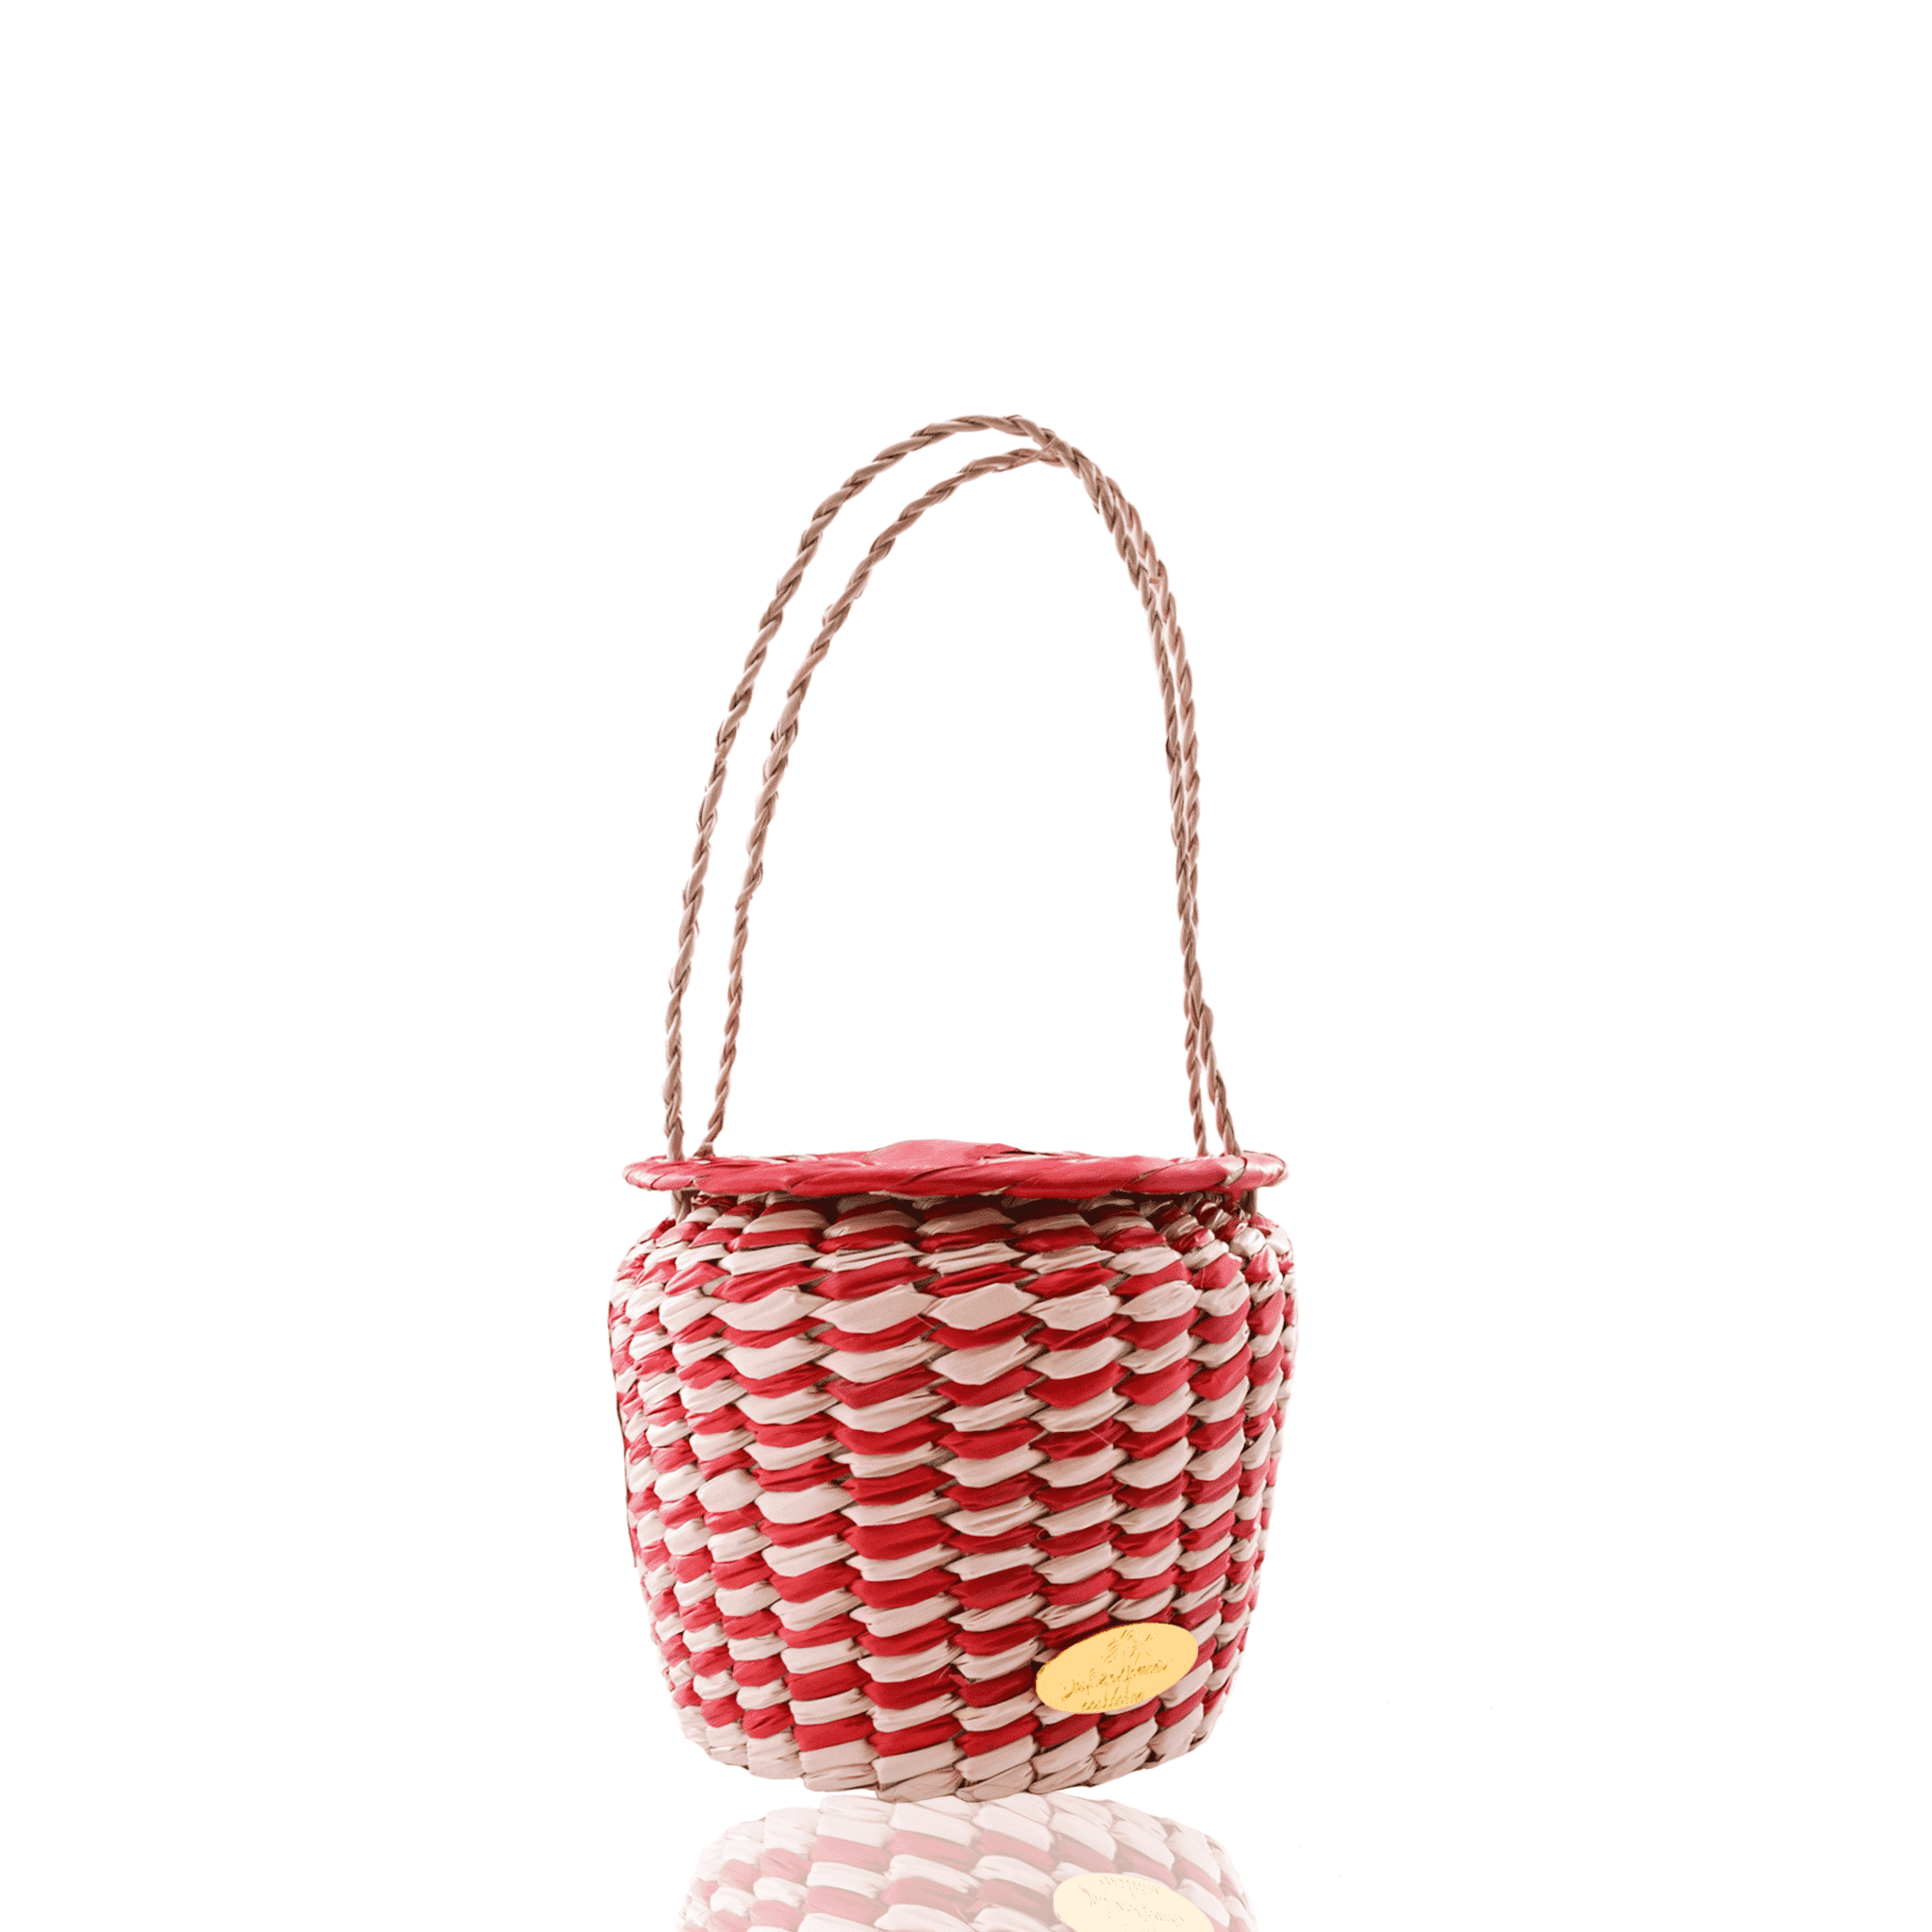 Honey Pot Basket Bag in Red and White – Josephine Alexander Collective